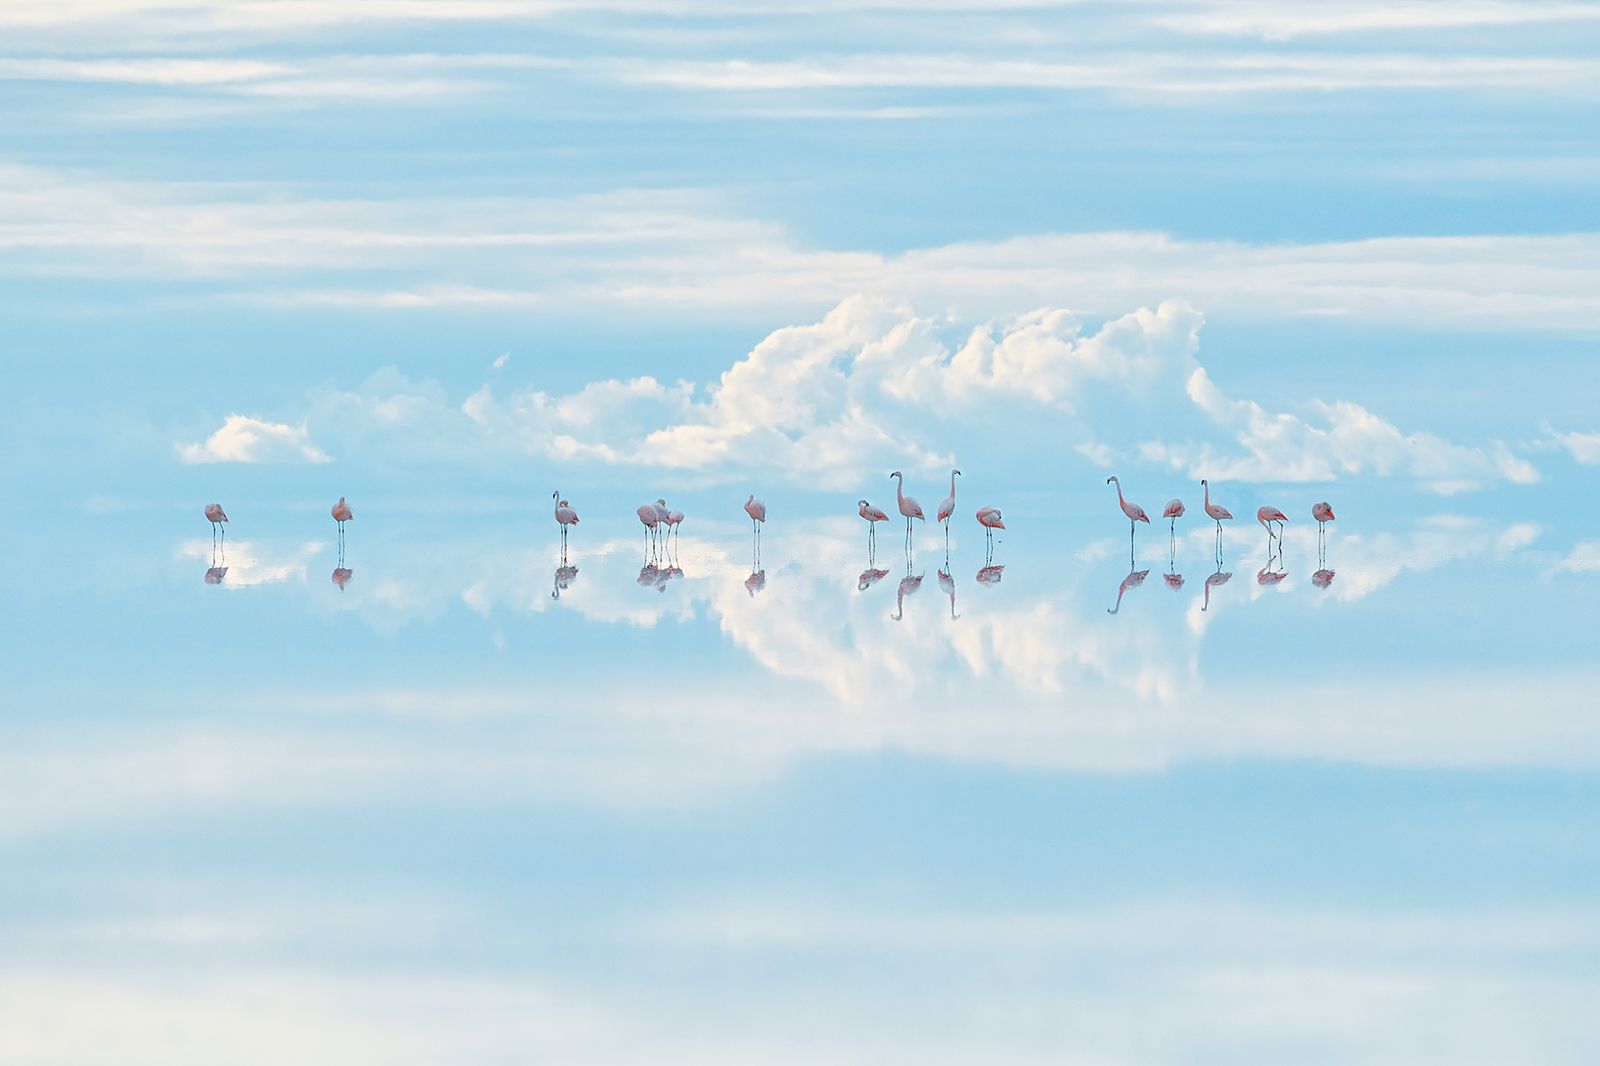 Japanese photographer Junji Takasago captured this dream-like scene, called "Heavenly flamingos," in Bolivia. Photographed high in the Andes, Salar de Uyuni is the world's largest salt pan and home to a large lithium mine.